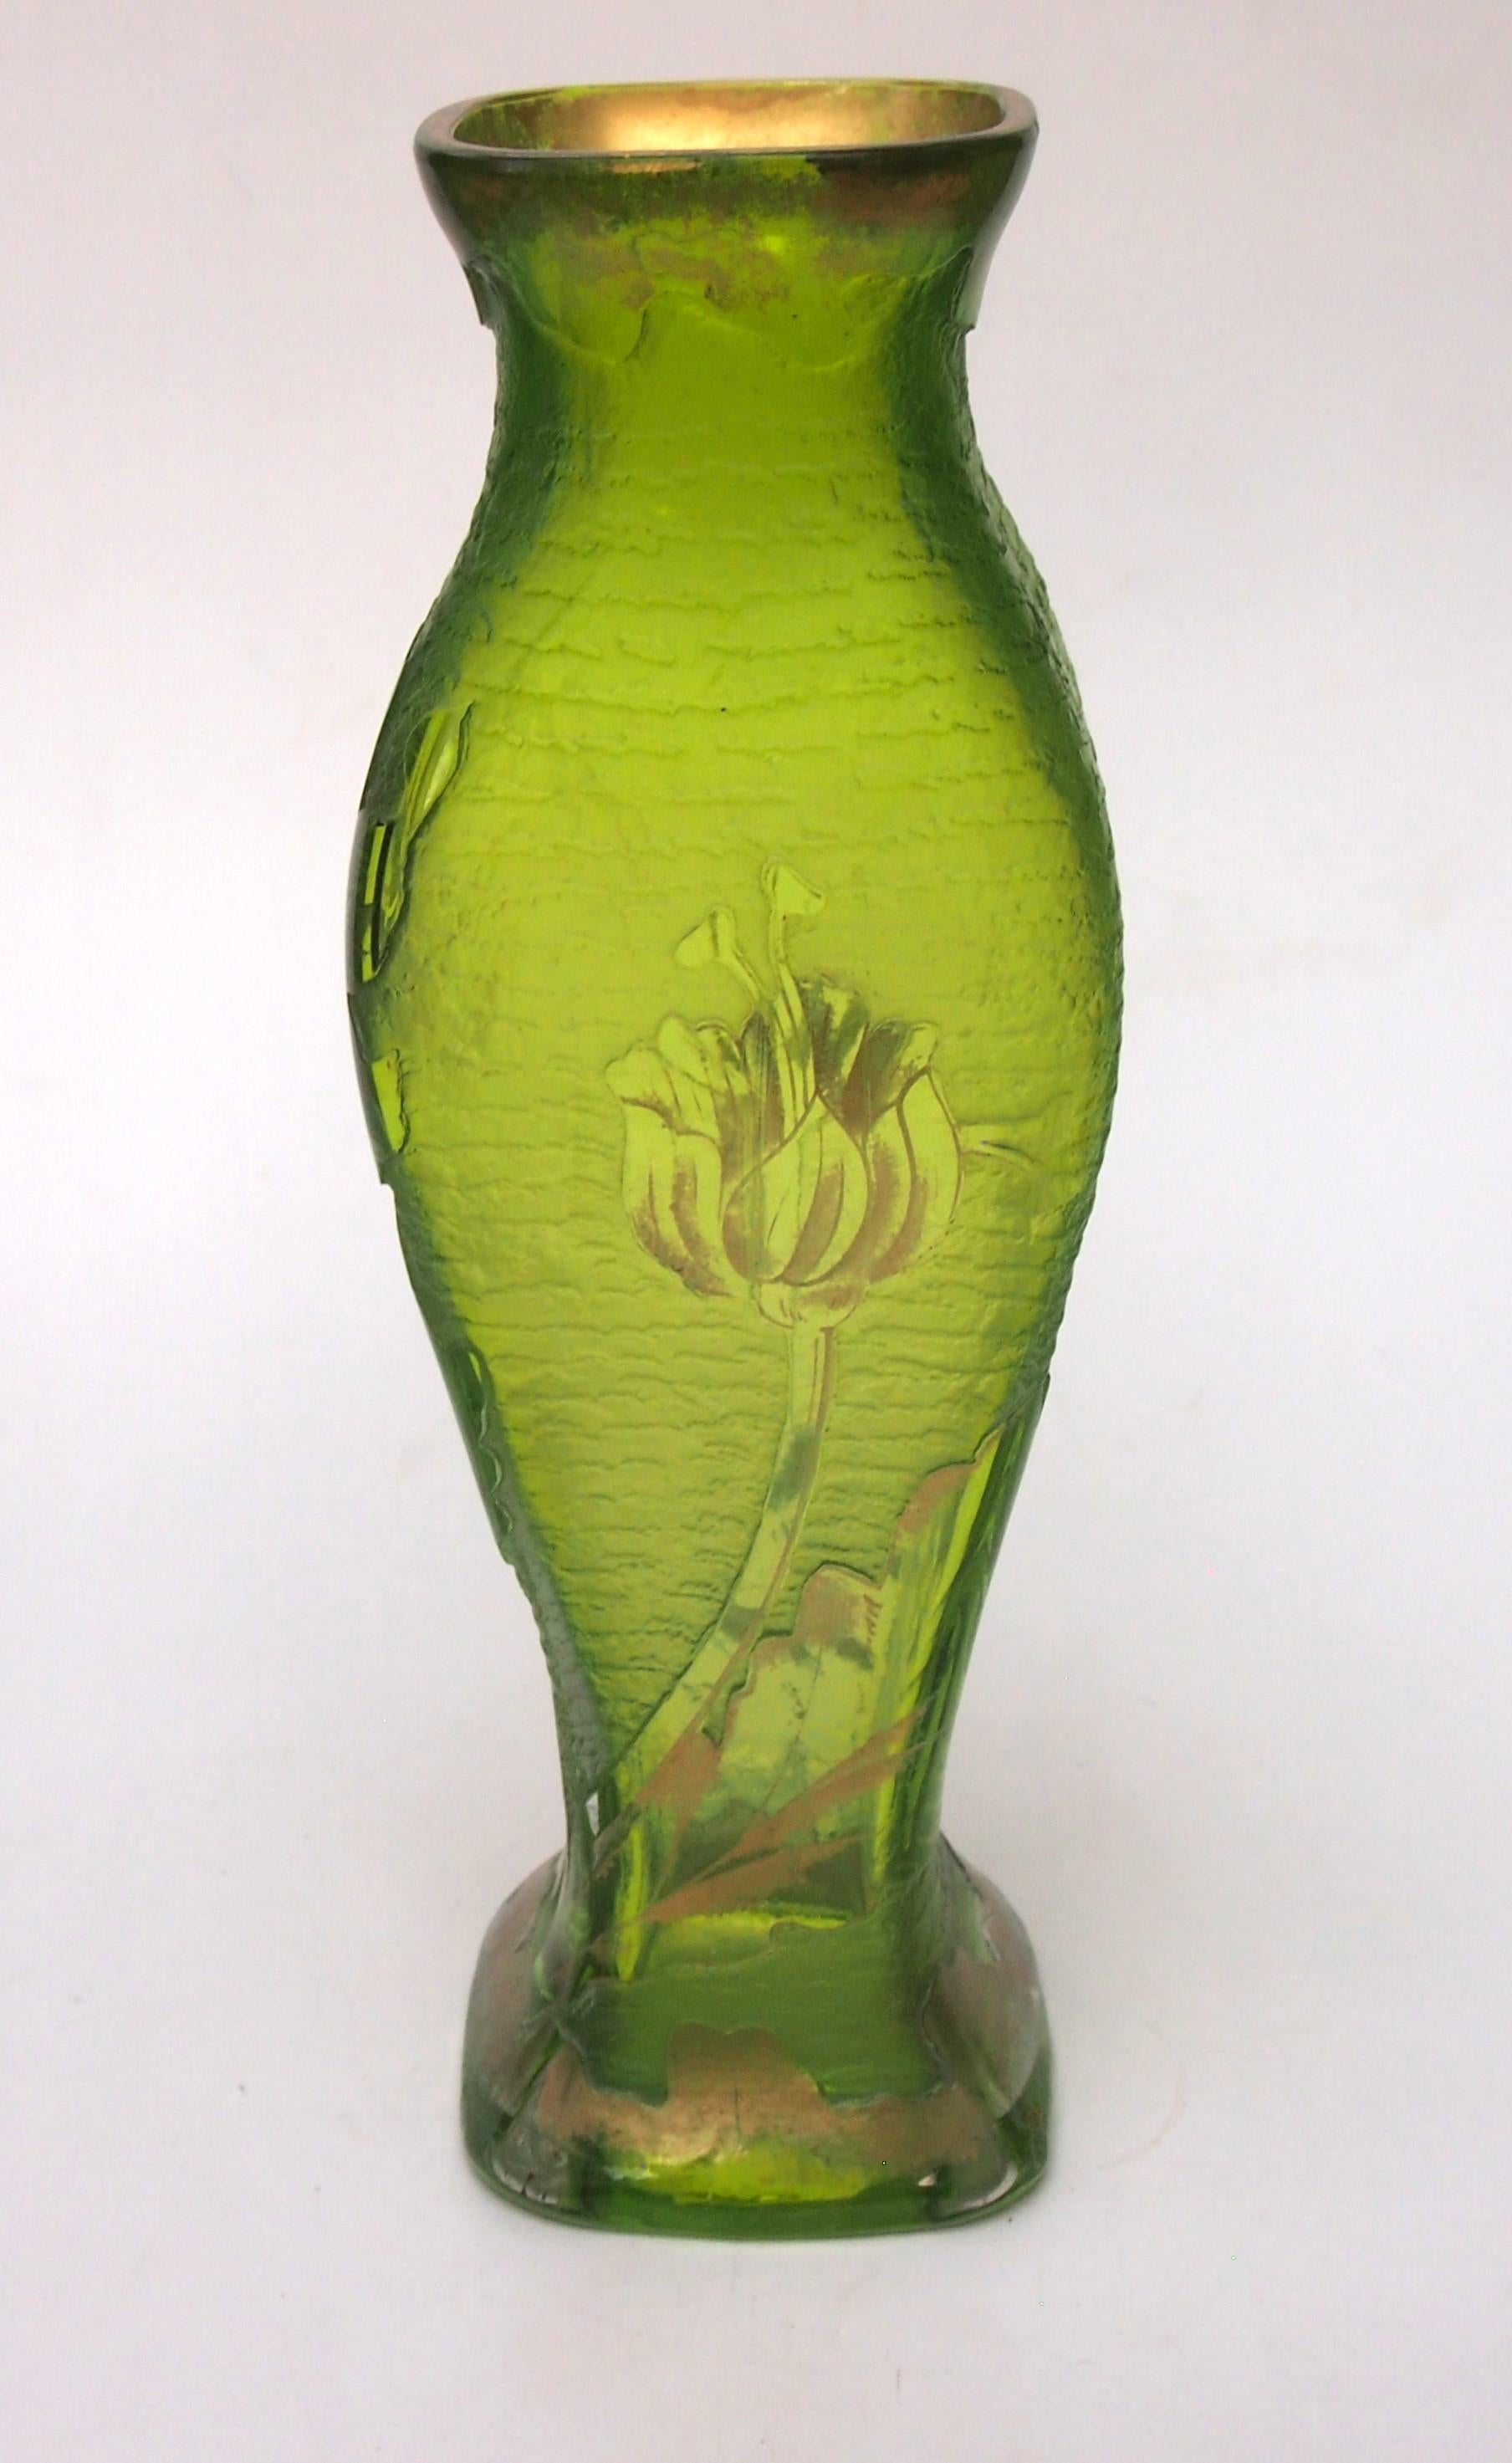 Deeply acid cut back and gilded cameo vase in yellow/green depicting fabulous lilies on all four sides. Unusually the acid cut back gives an impression of mottled bands laying behind the lilies. This slender elegant vase is by the great house of